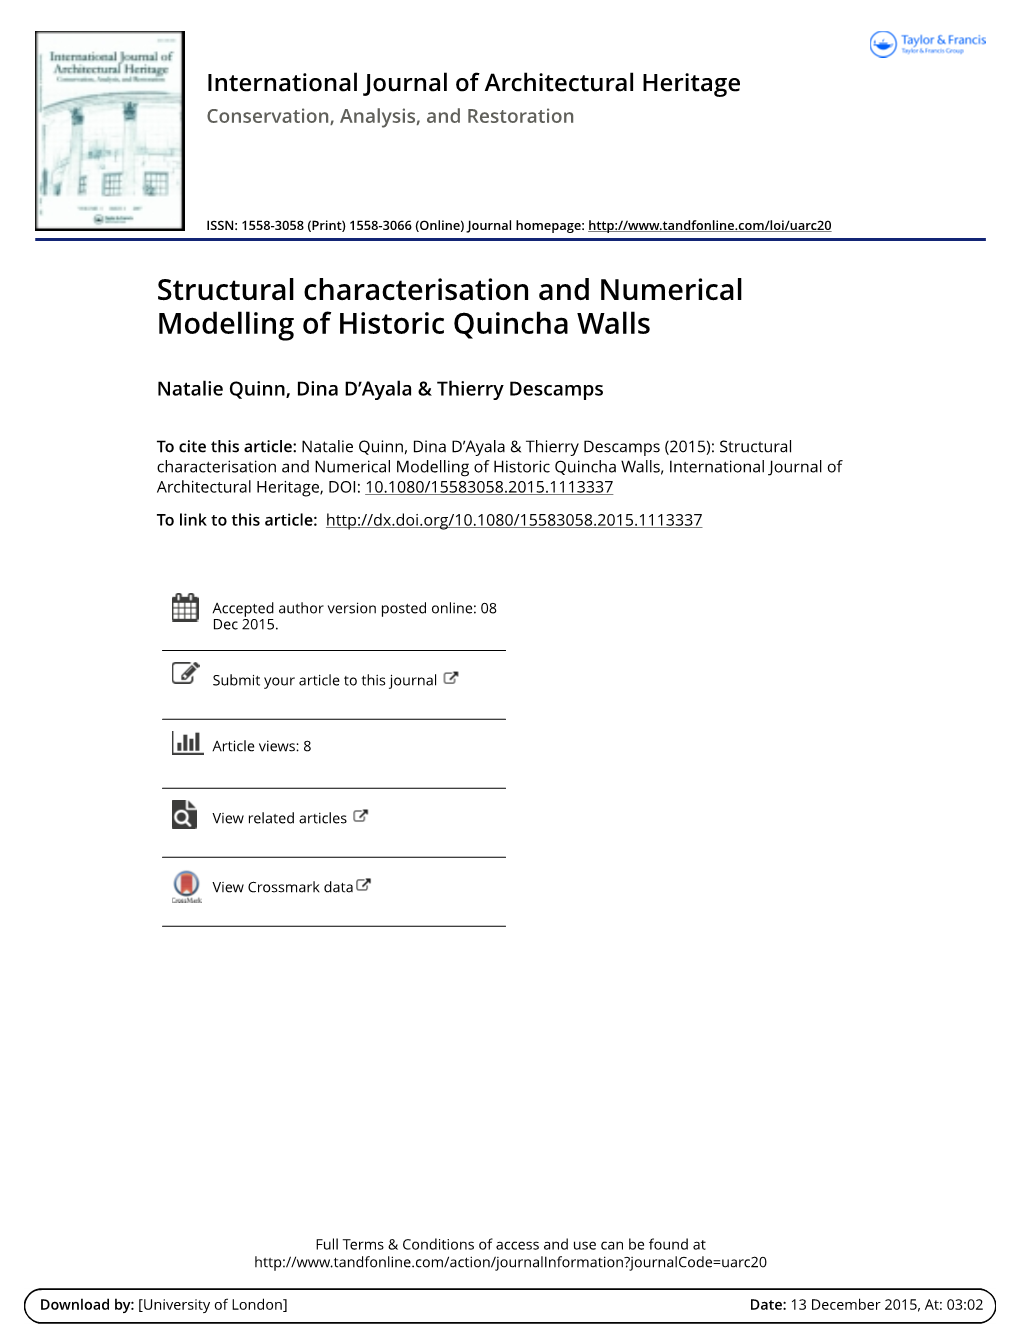 Structural Characterisation and Numerical Modelling of Historic Quincha Walls